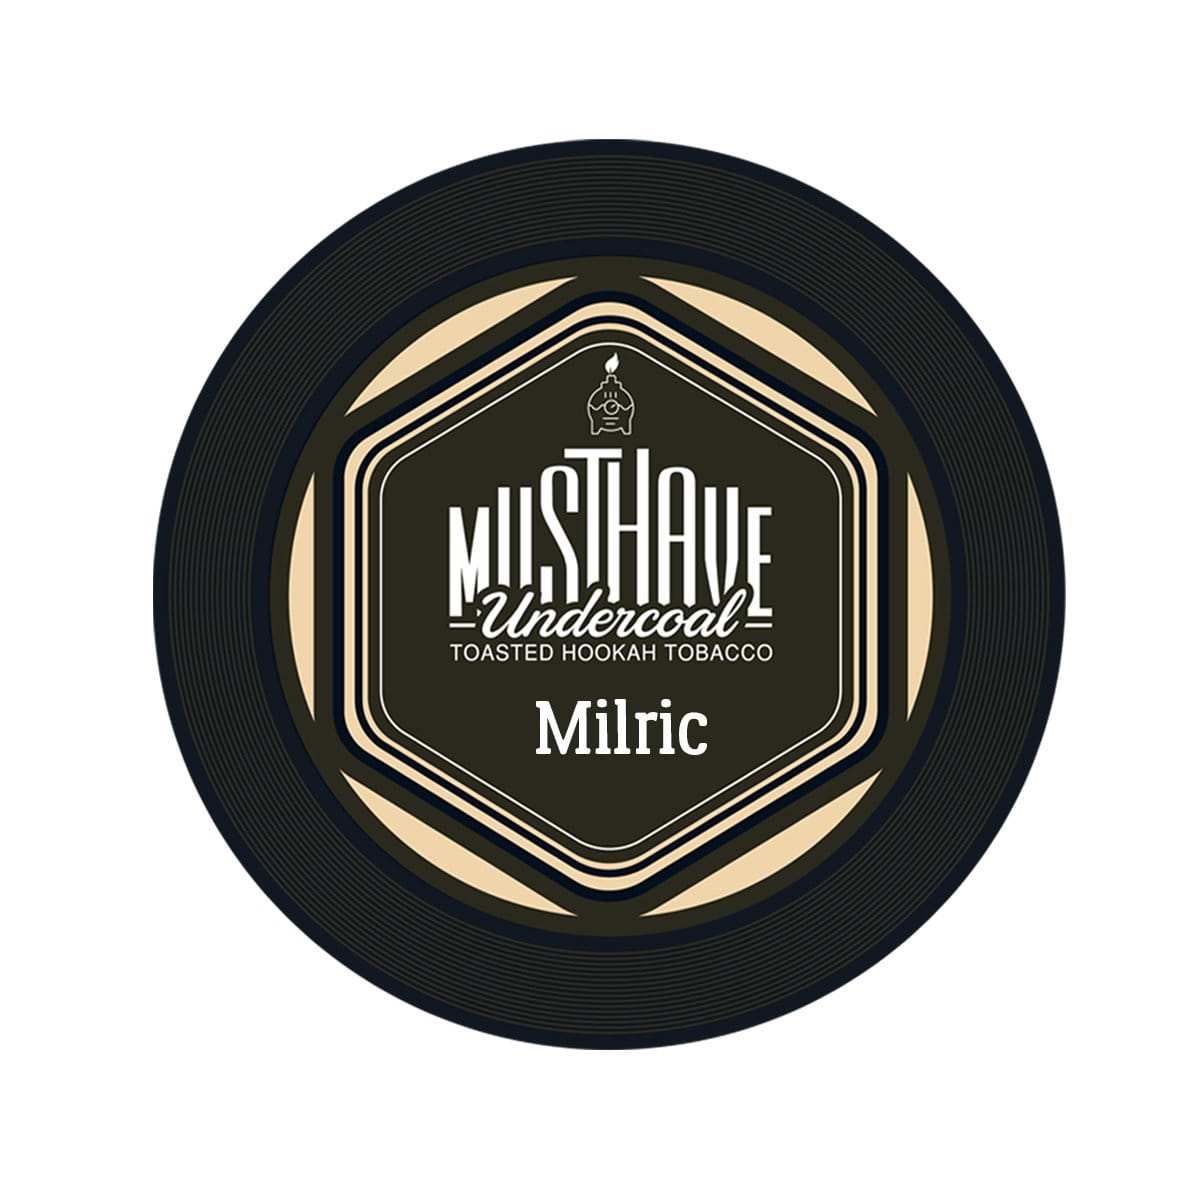 Musthave Tobacco - Milric 25g